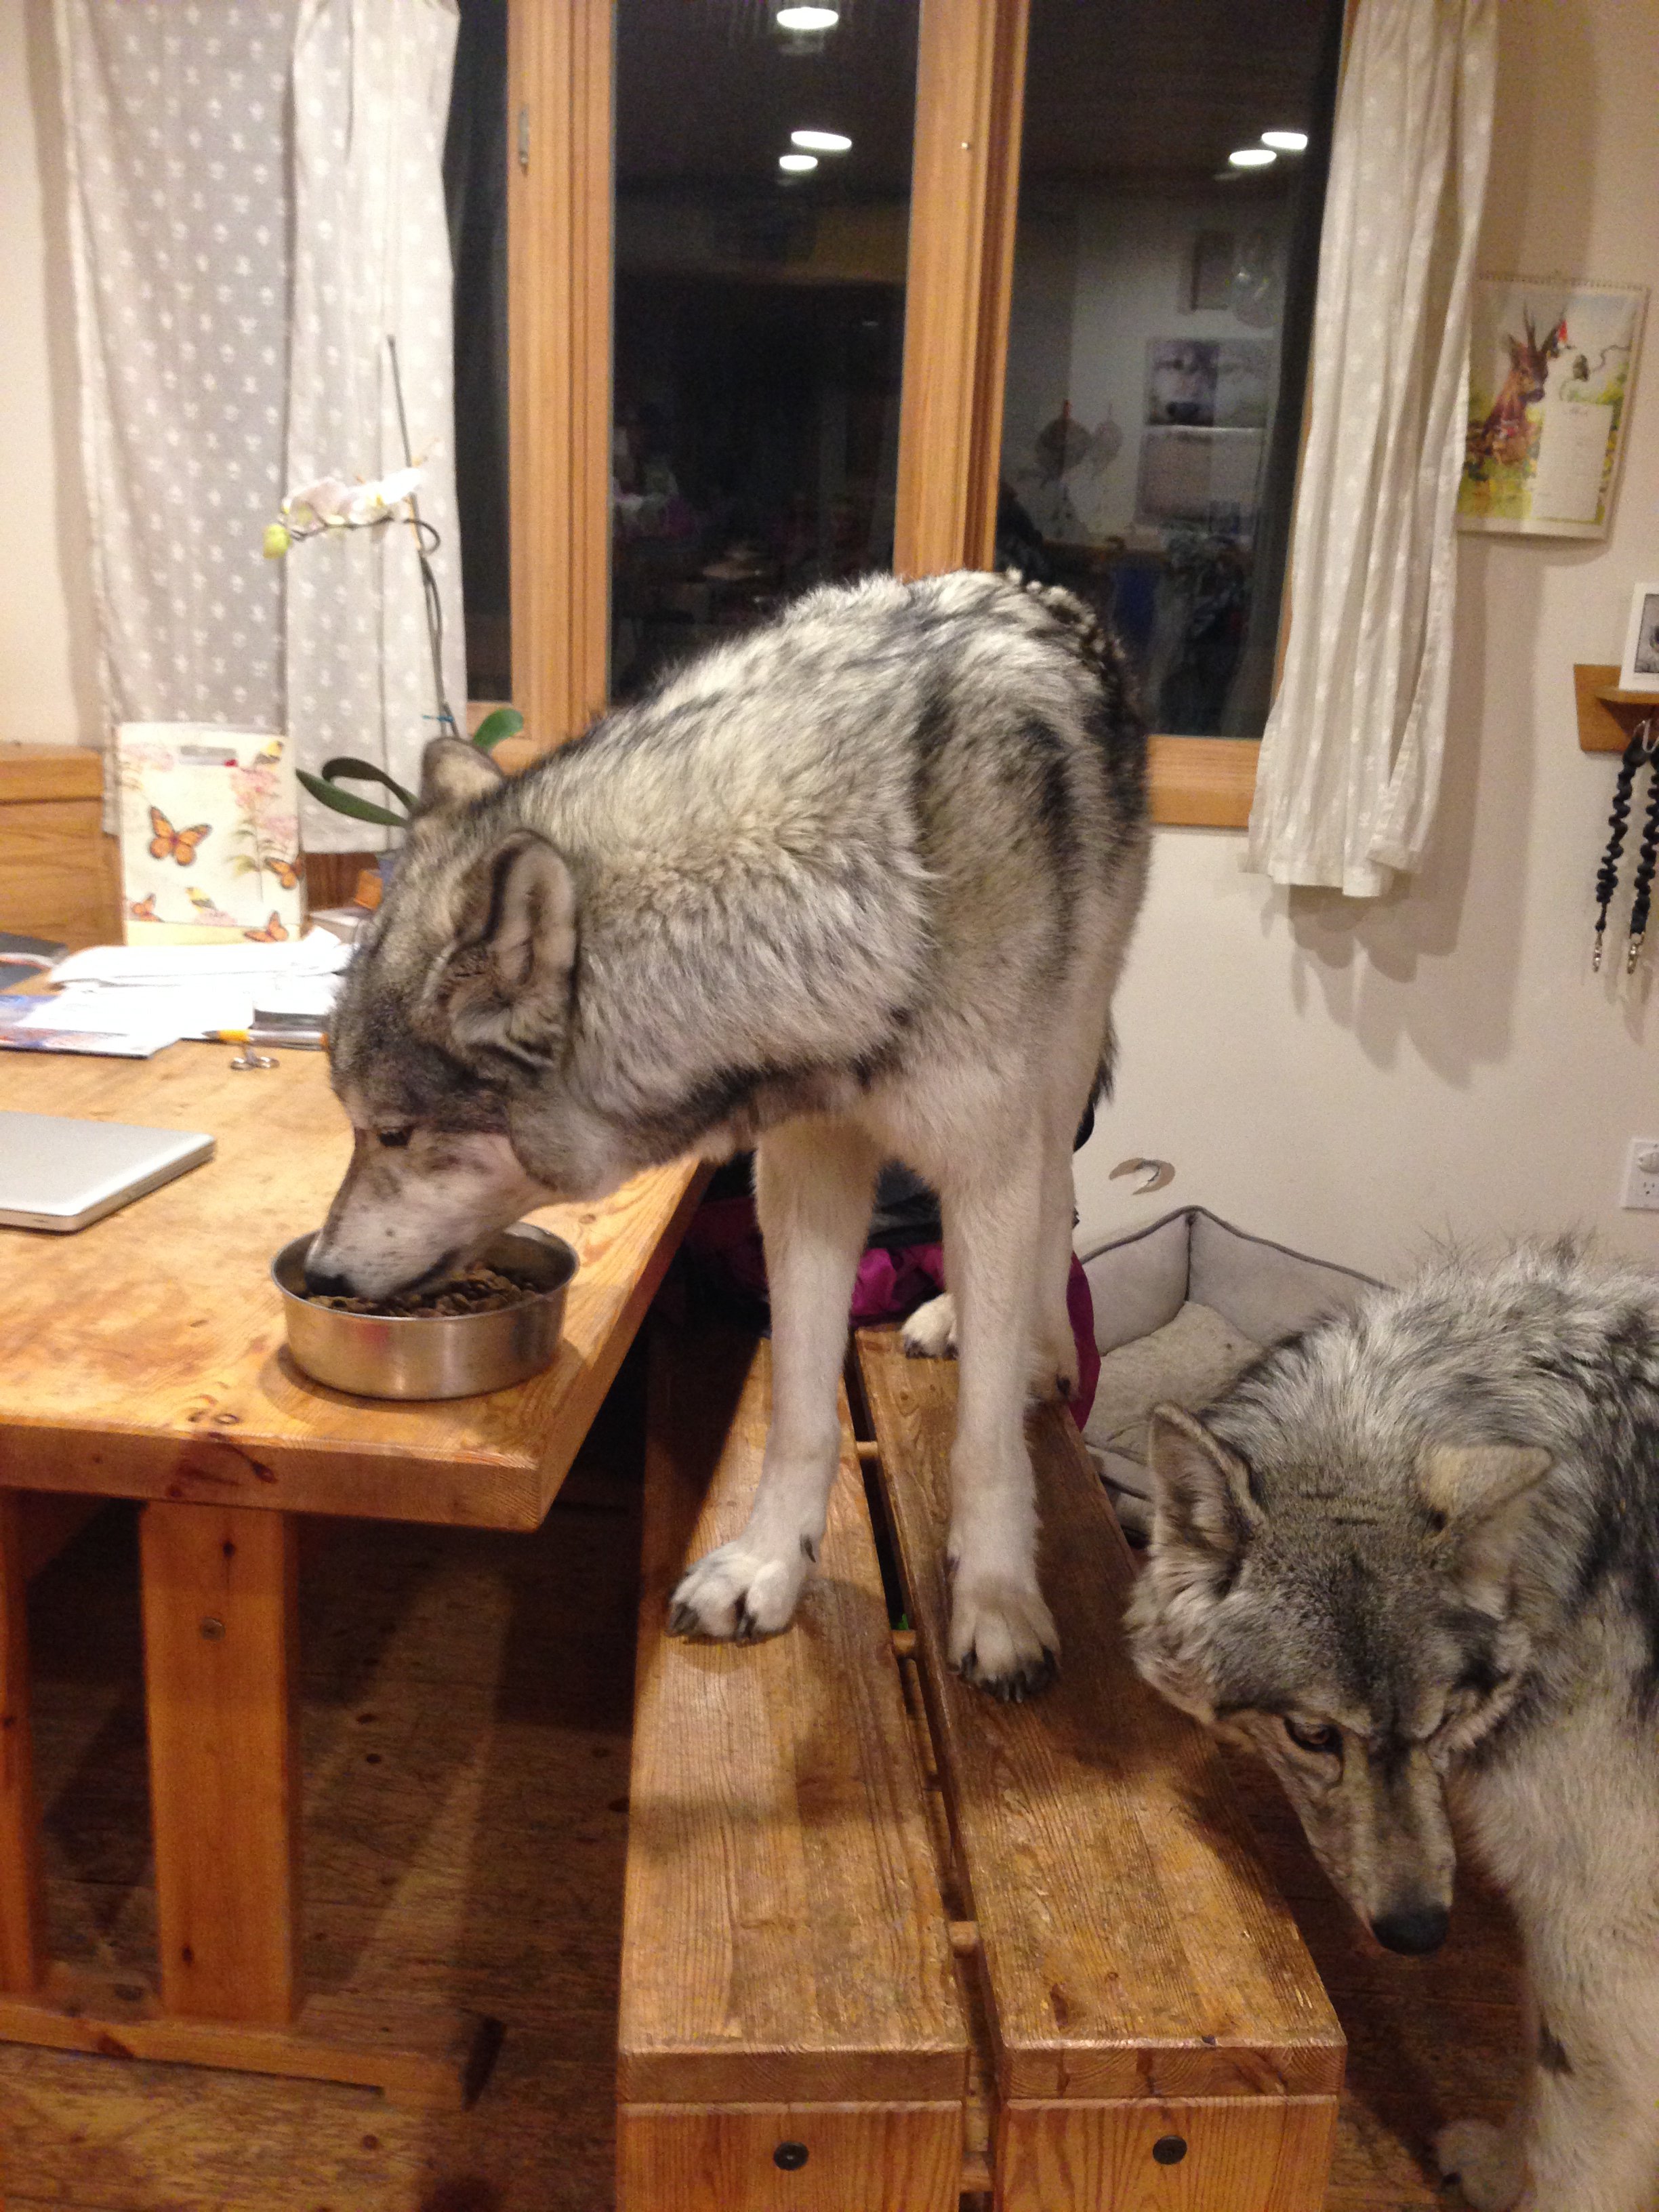 Kuna likes to eat at the dinner table